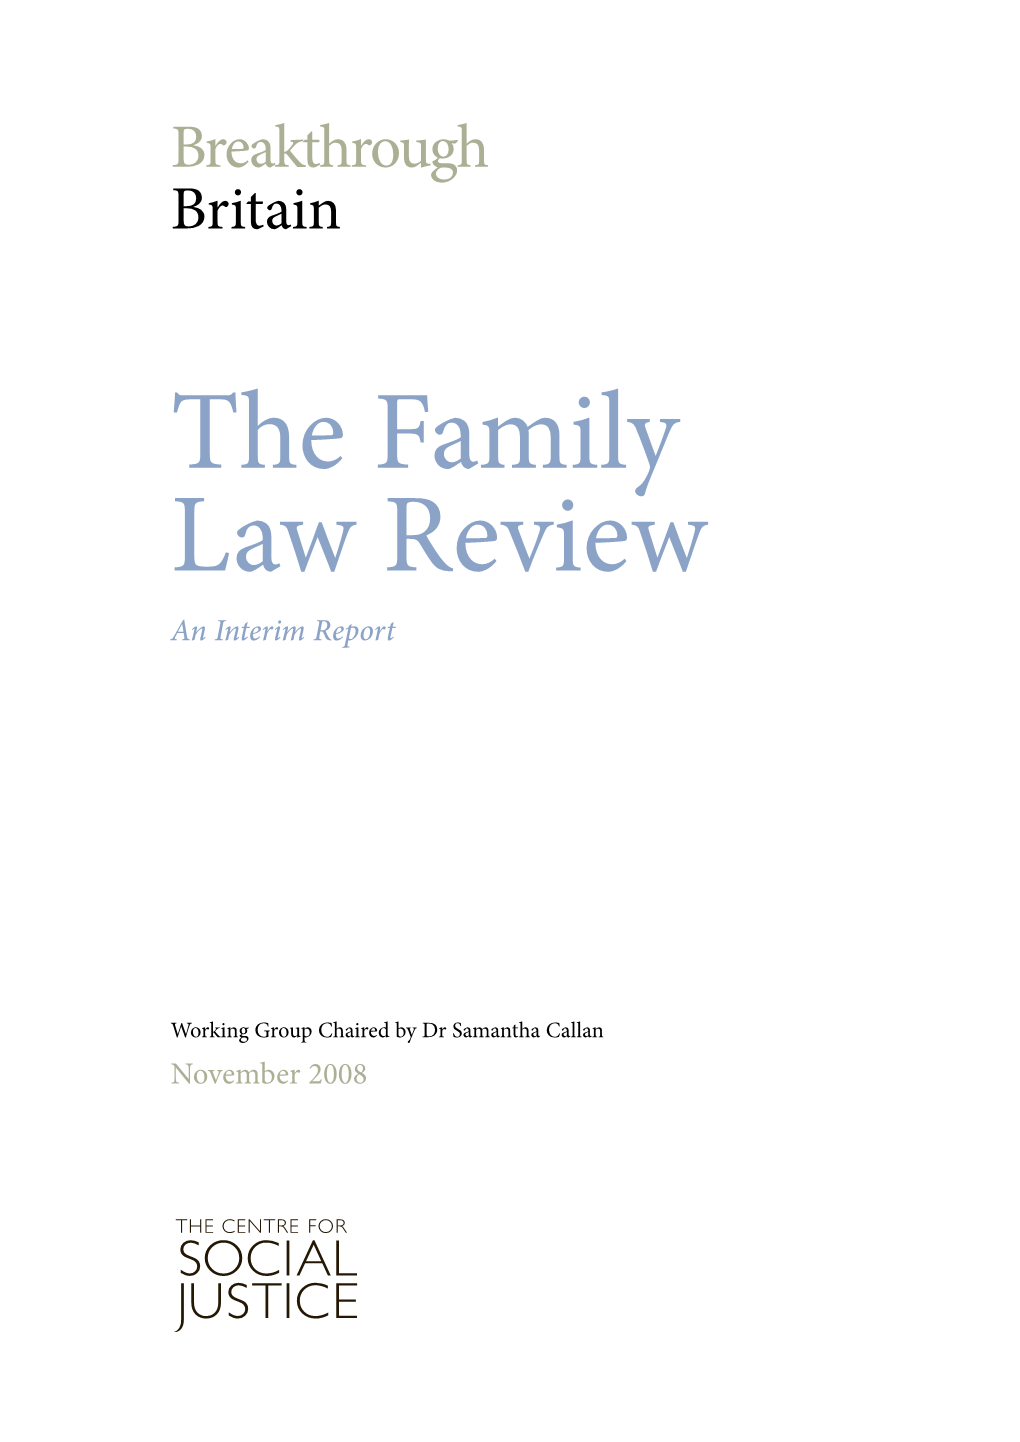 The Family Law Review an Interim Report